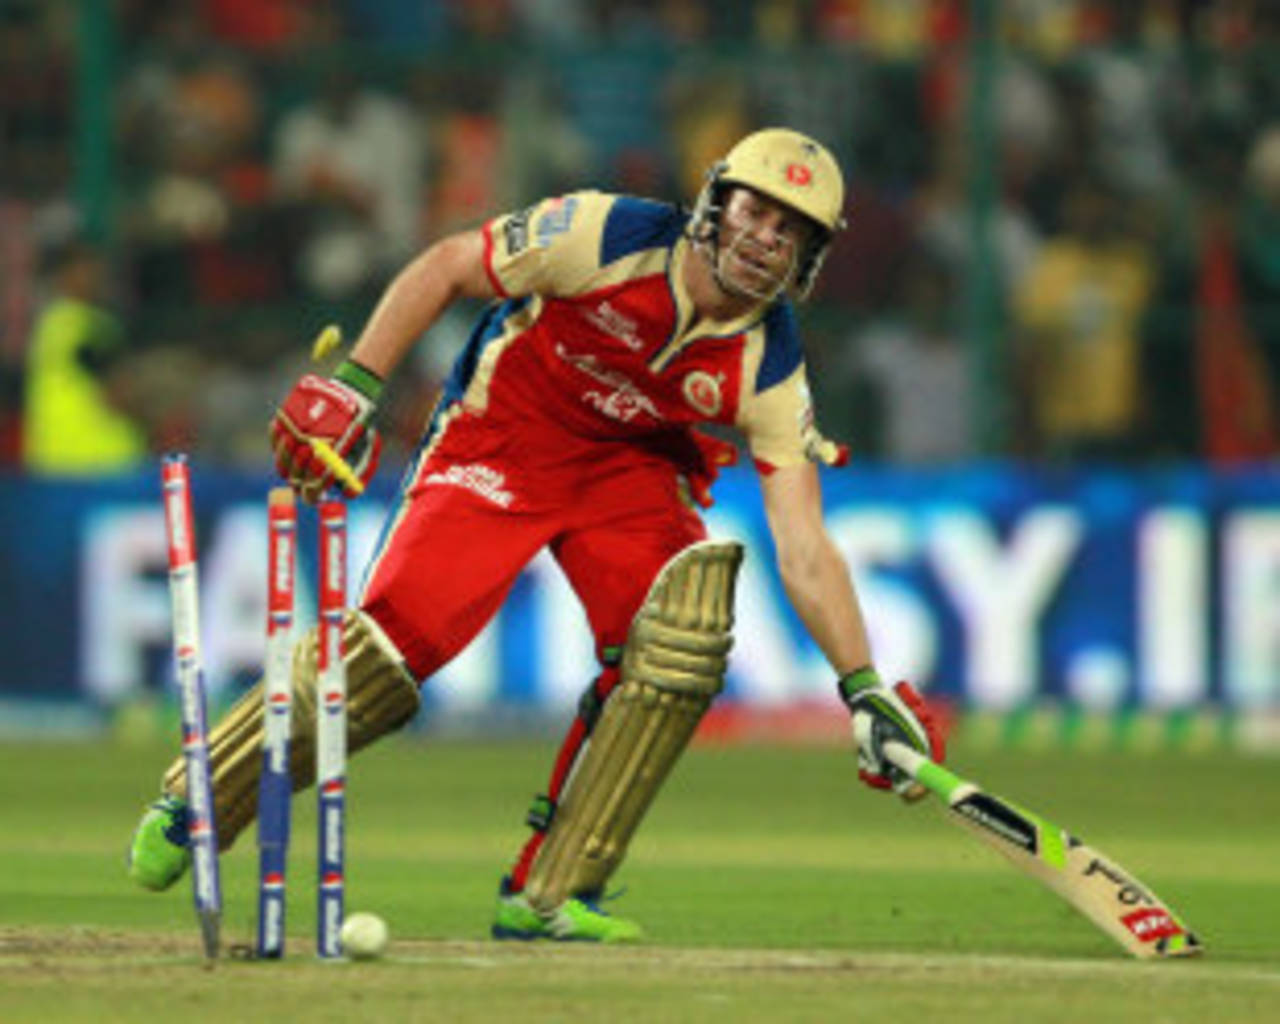 AB de Villiers rued his run-out, and said the collapse reflected RCB's poor batting&nbsp;&nbsp;&bull;&nbsp;&nbsp;BCCI